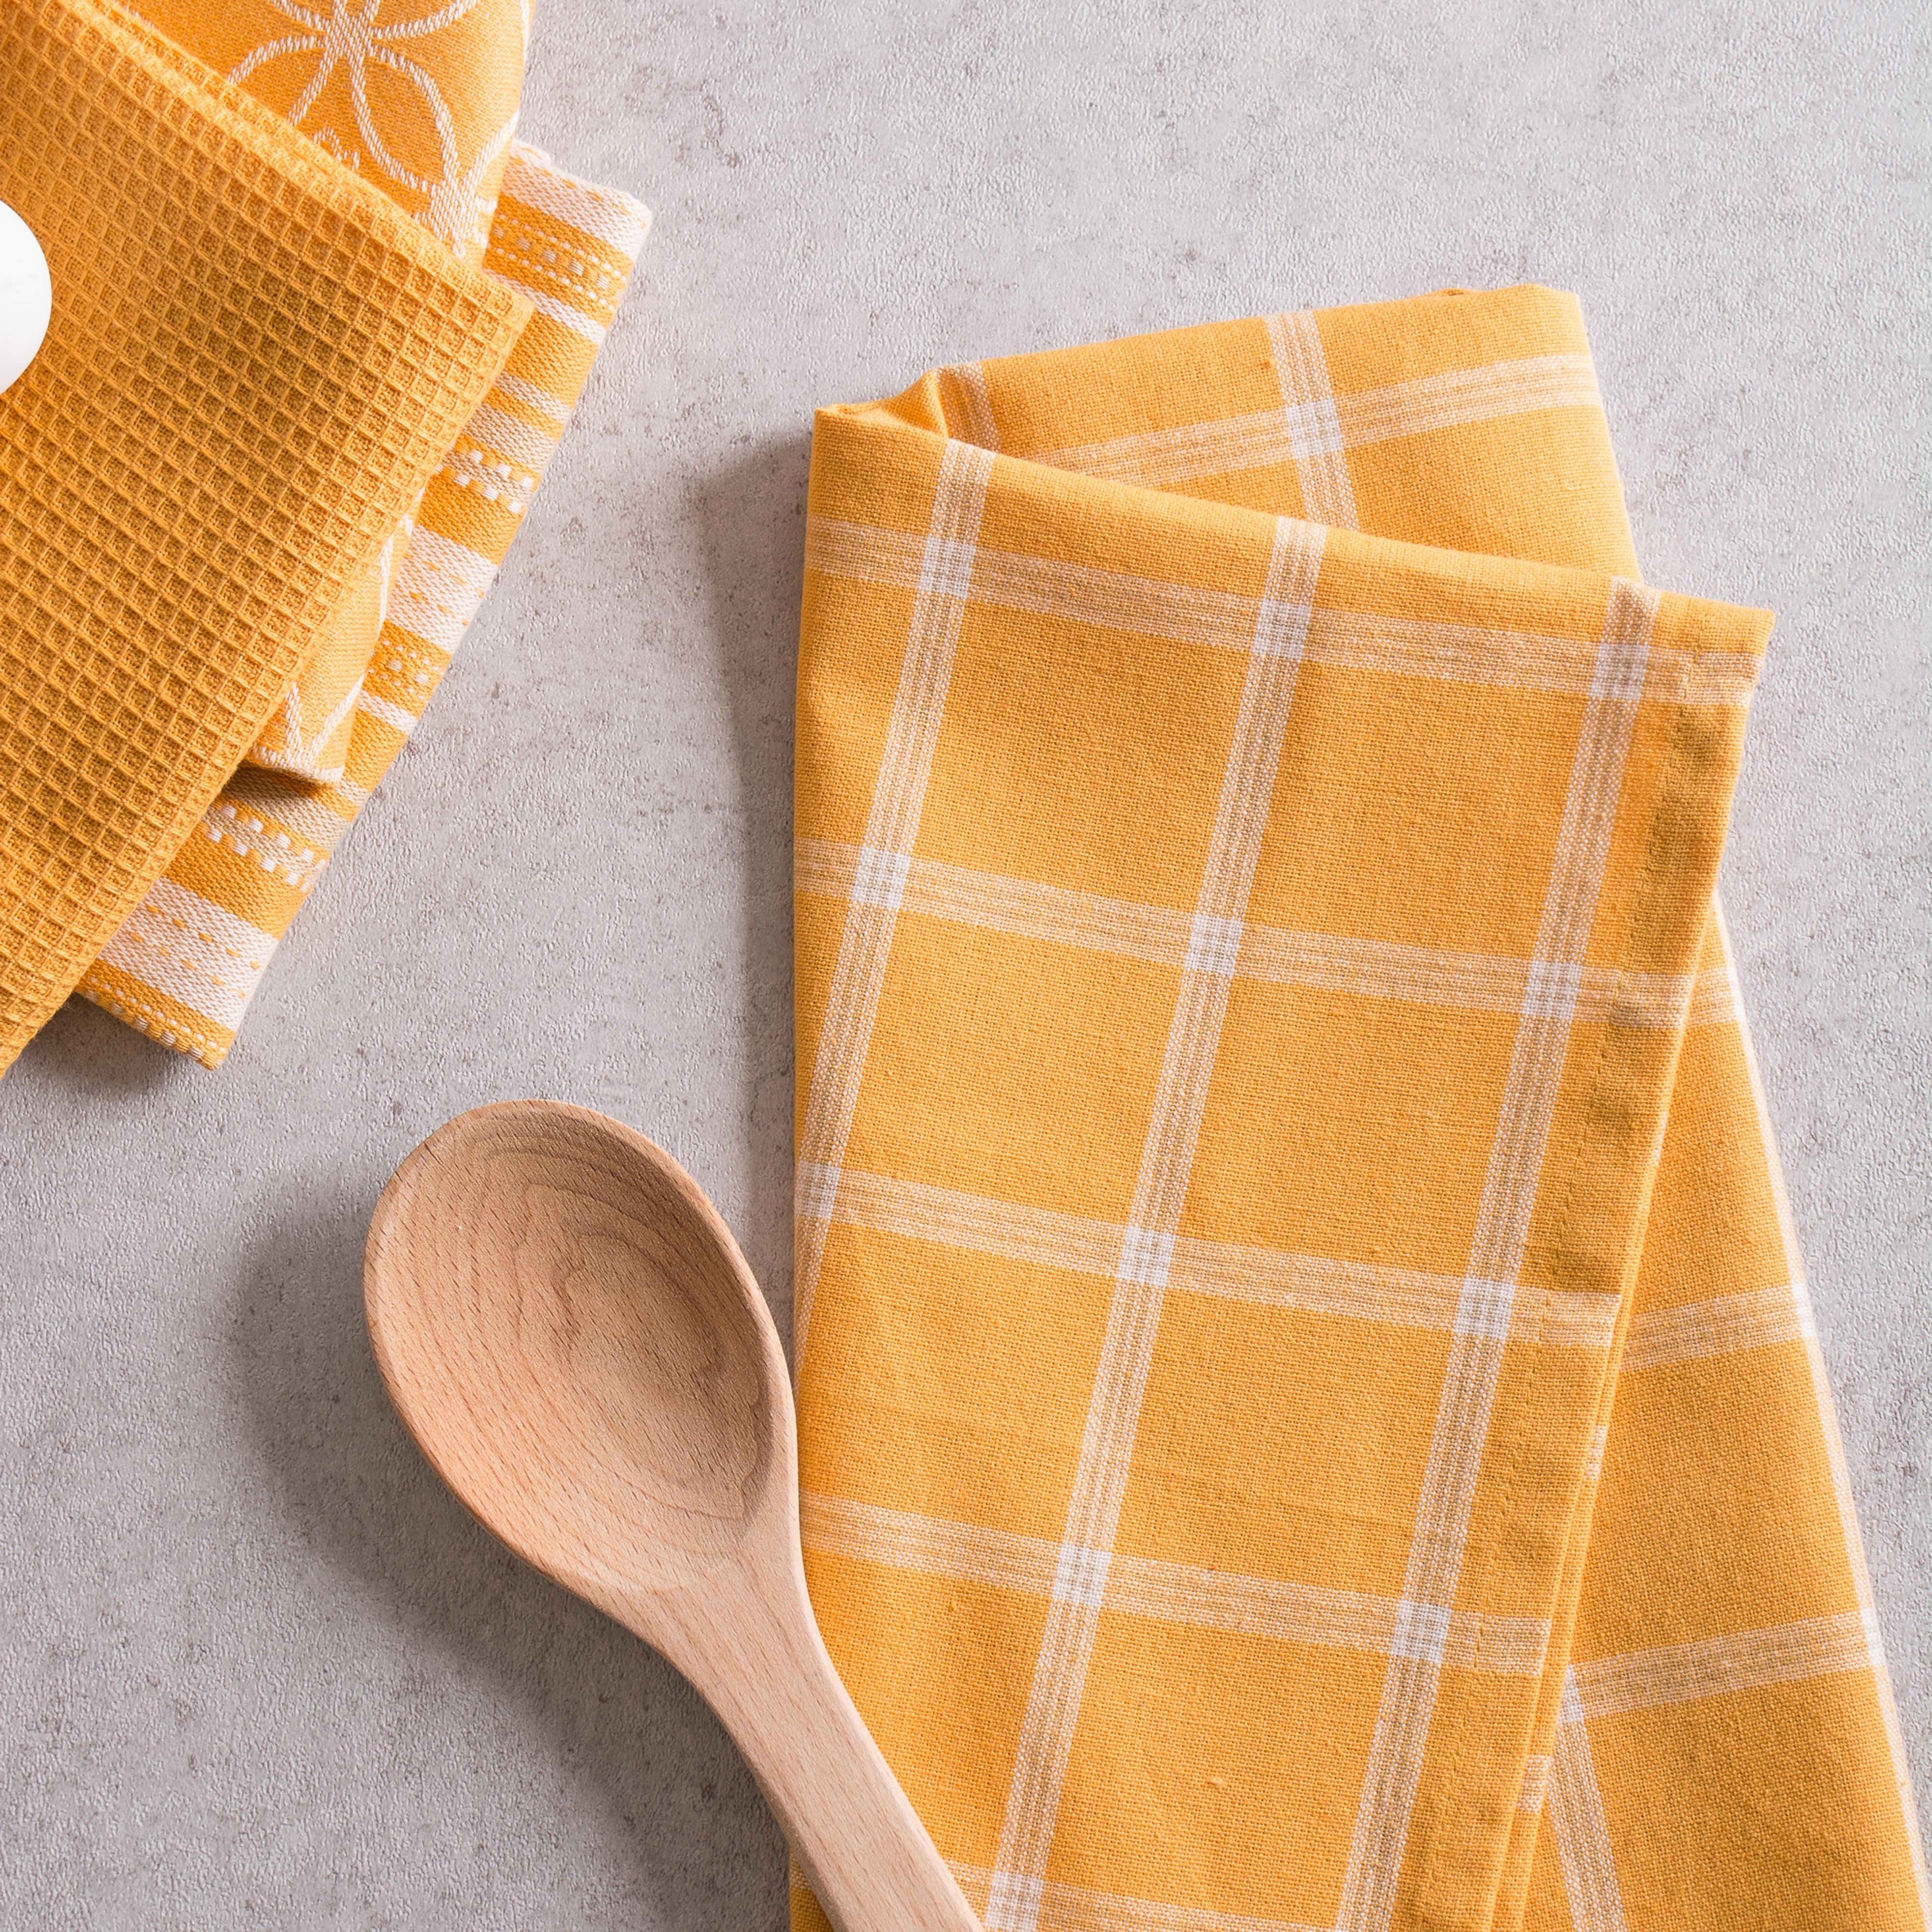 https://ak1.ostkcdn.com/images/products/is/images/direct/6f745754c1a4d489e62b85a229b1ab573cbdc72d/Design-Imports-Assorted-Dishtowel-%26-Dishcloth-Set-of-5-%28DT%3A-28-inches-long-x-18-inches-wide%3BDC%3A-13-inches-long-x-13-inches-wide%29.jpg